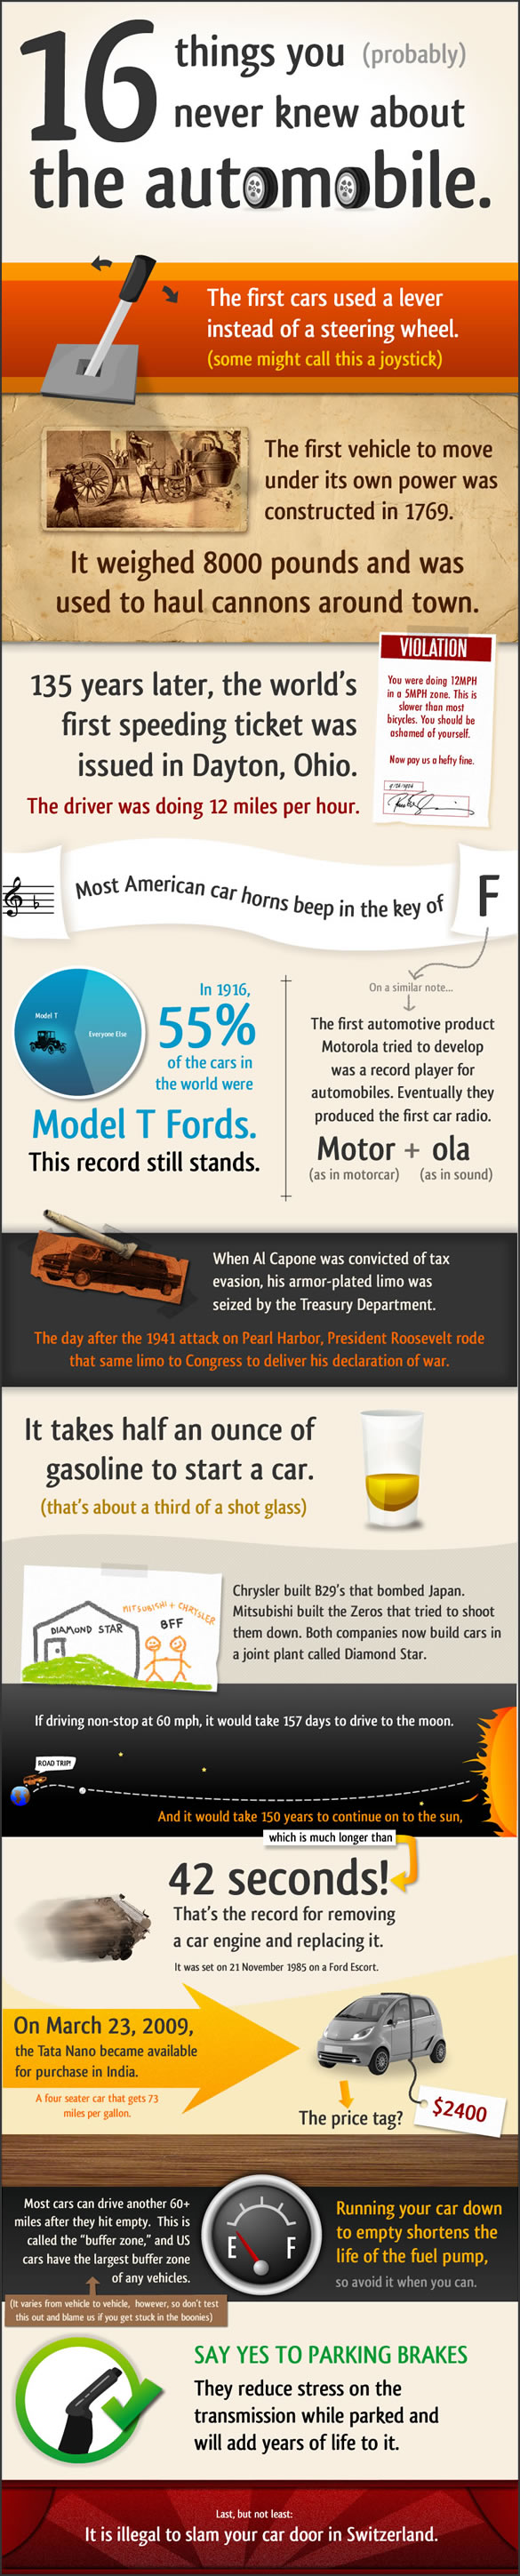 16 Things You Never Knew About the Automobile